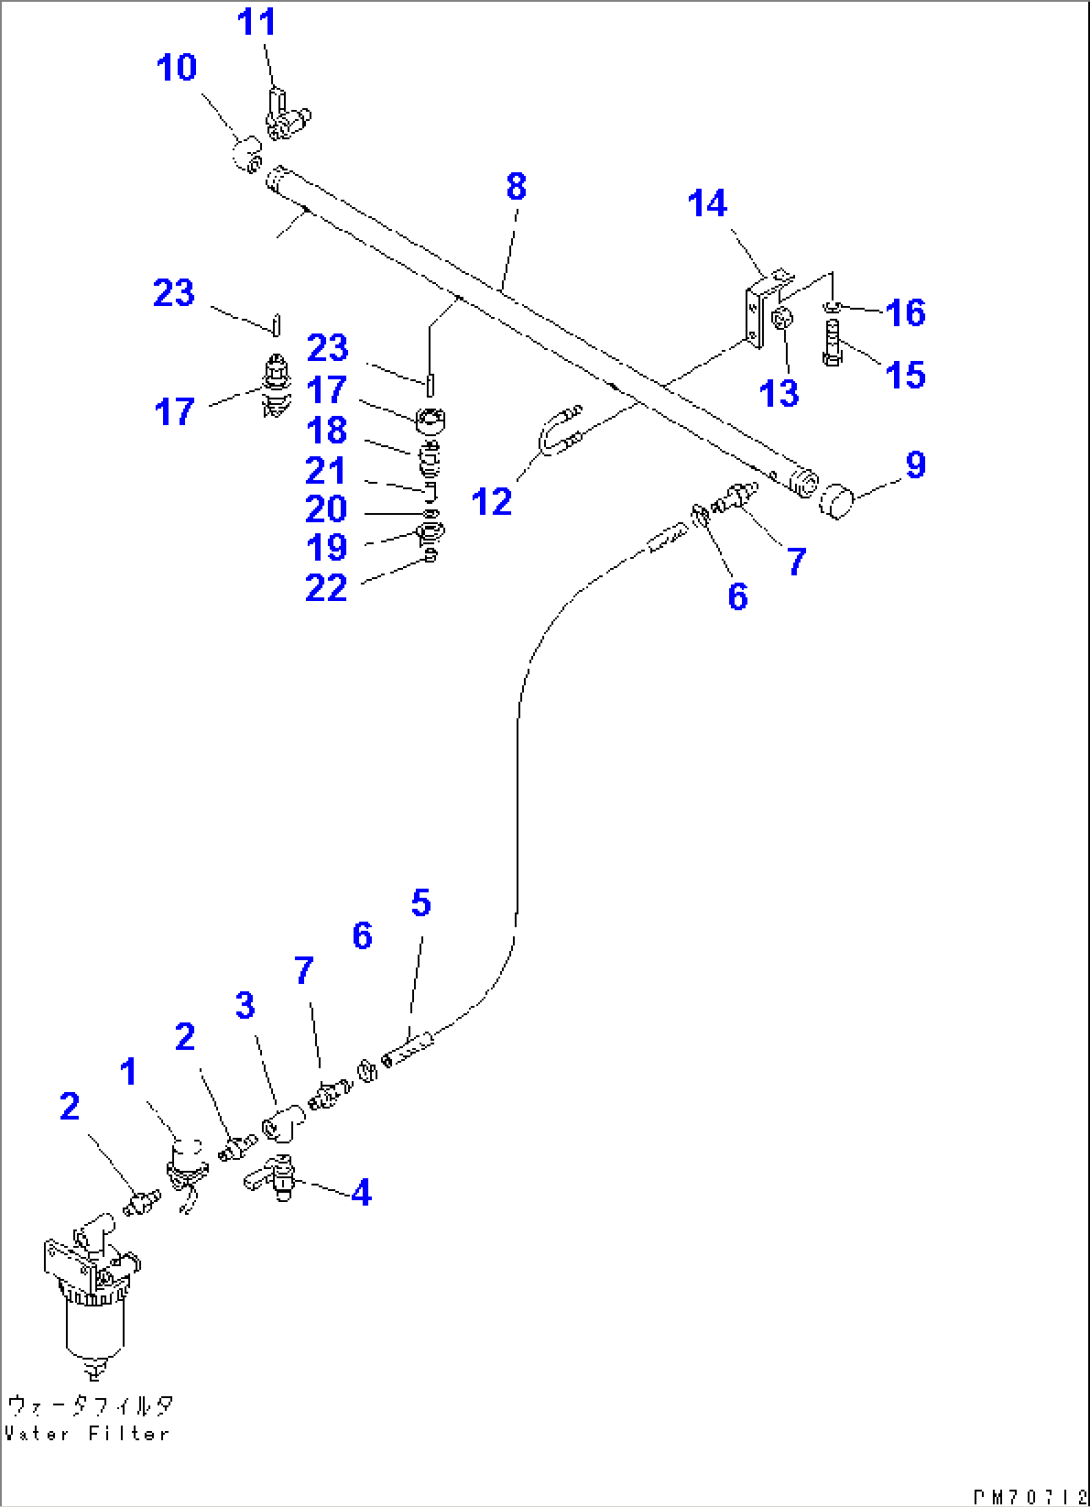 WATER PIPING (3/3) (REAR NOZZLE LINE)(#5210-)